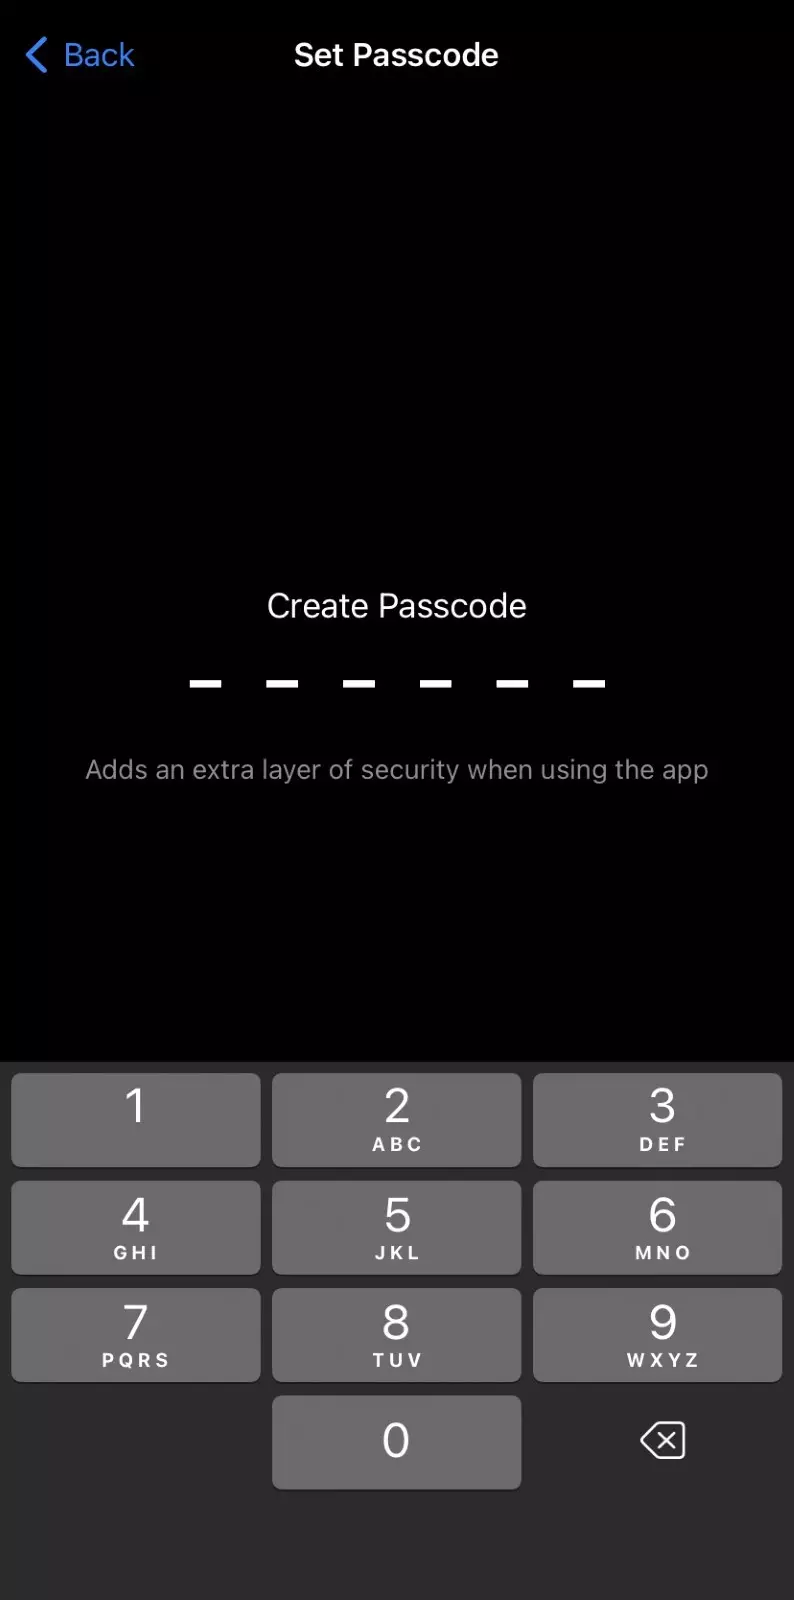 If you want to create a new wallet, you will have to set a 6-digit passcode; 